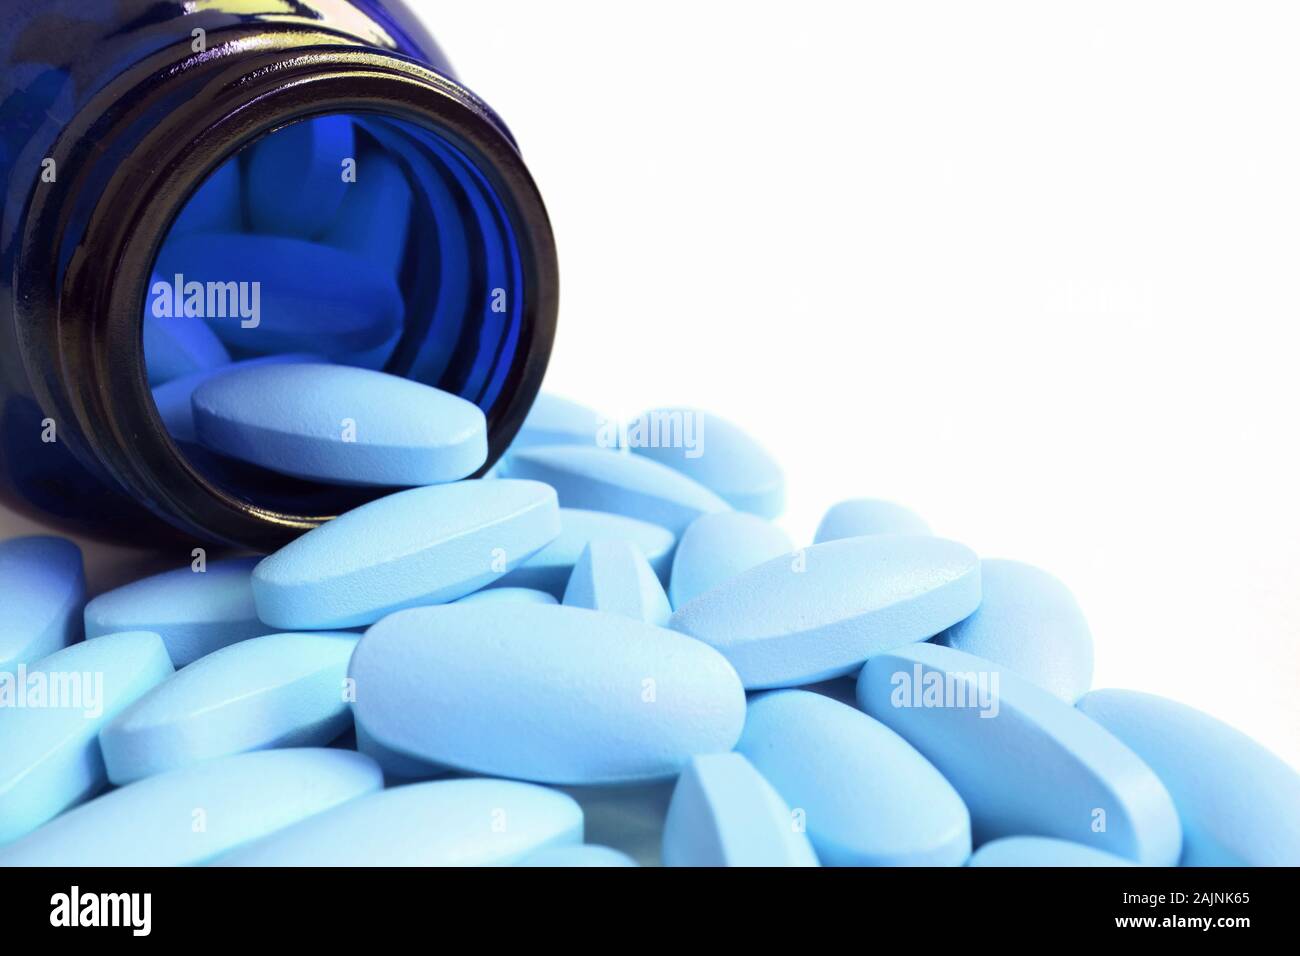 Light blue oval shaped pills scattered from deep blue glass bottle on white background with copy space Stock Photo